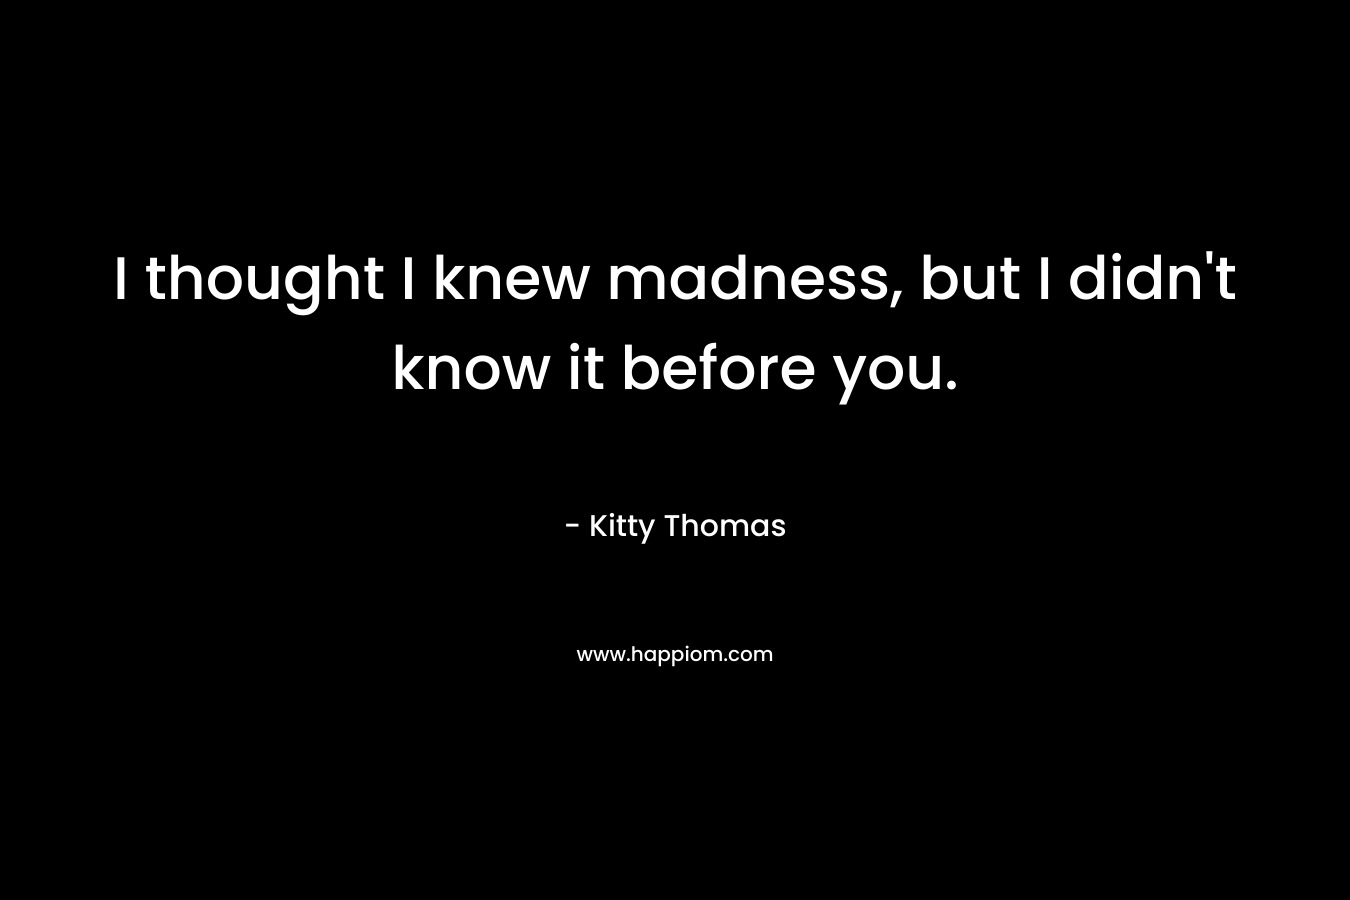 I thought I knew madness, but I didn’t know it before you. – Kitty Thomas